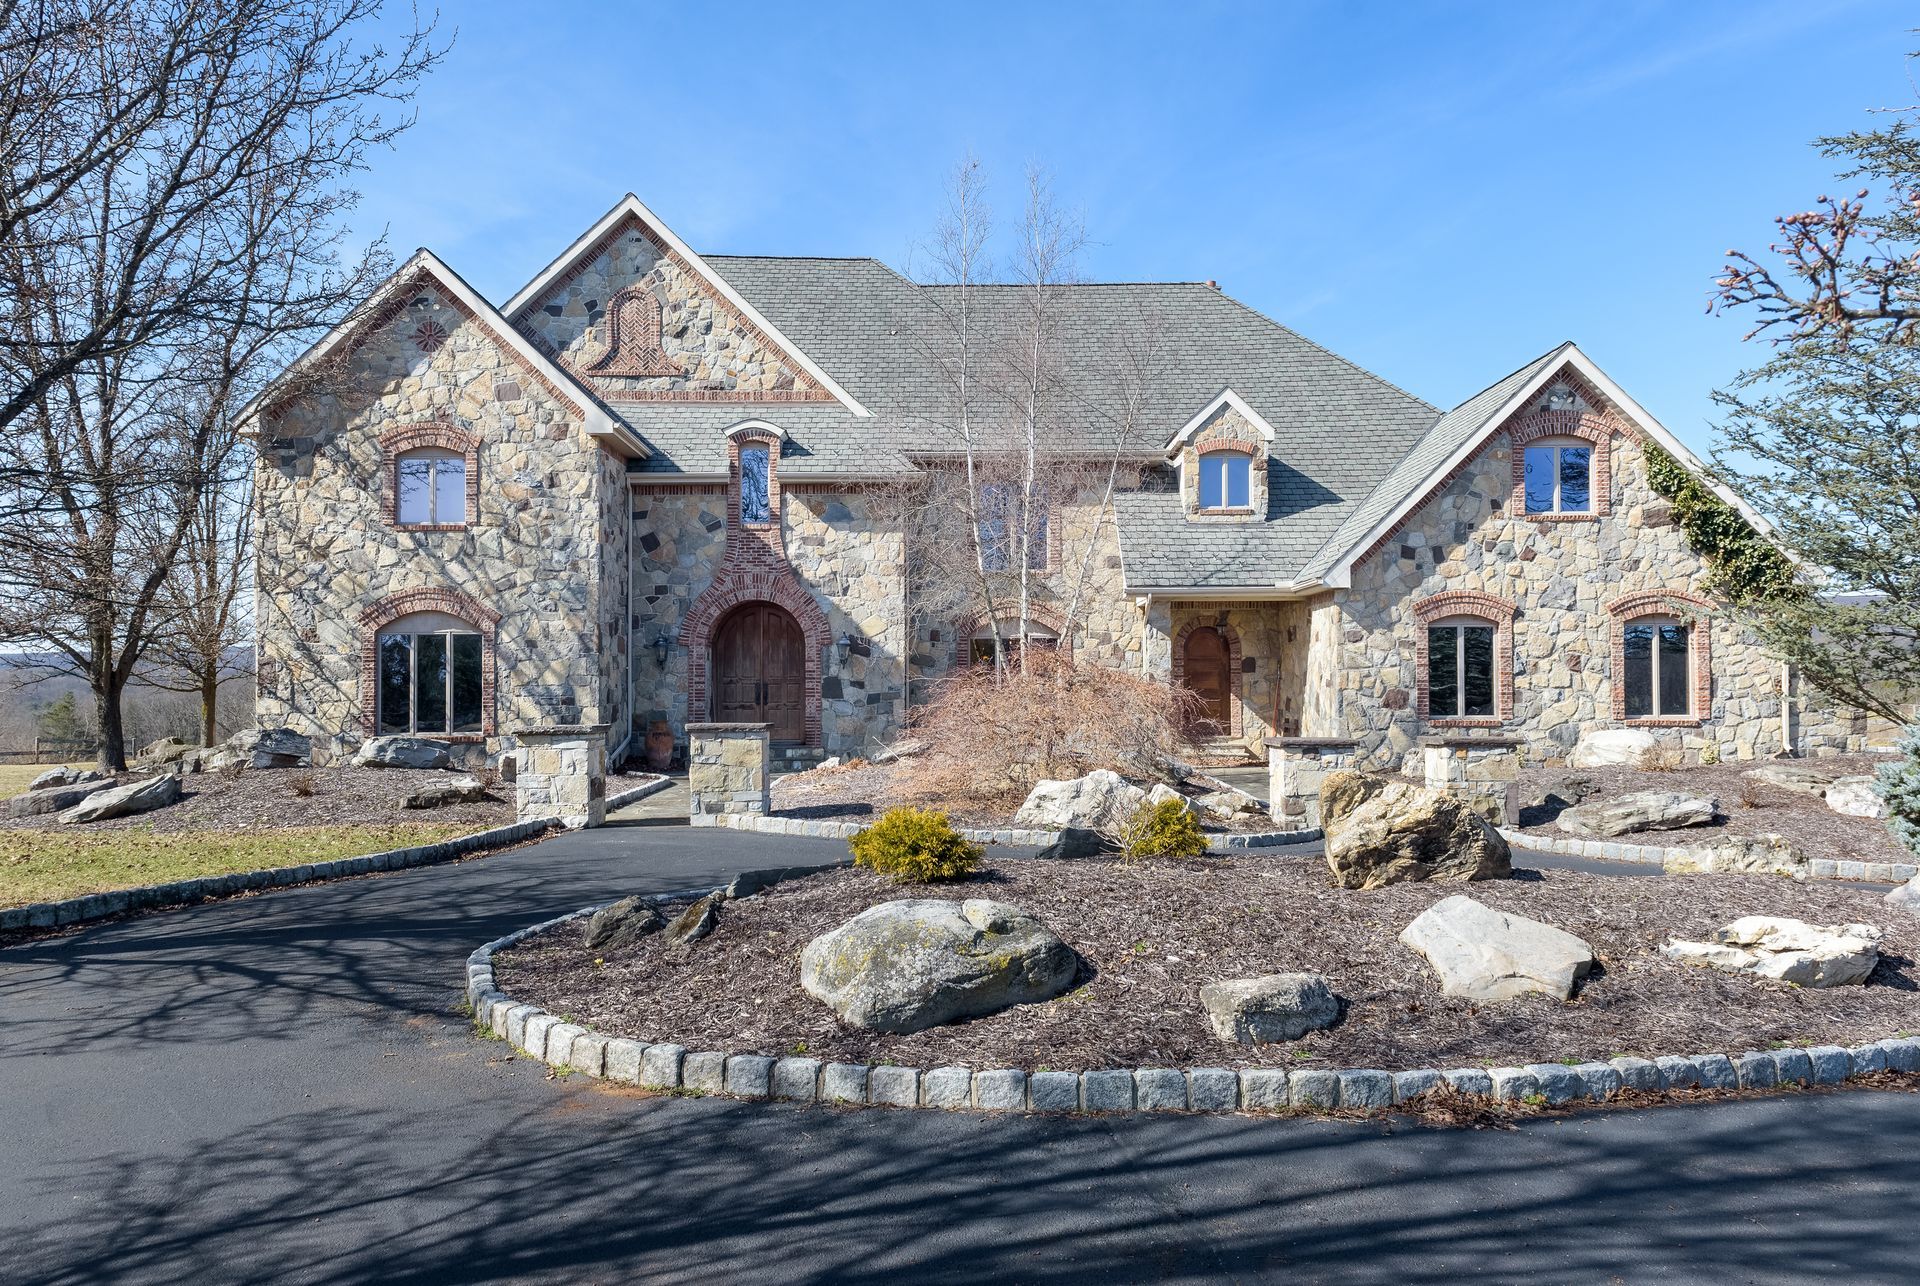 A large stone house with a gray roof is for sale at Chestnuthill Countryside Manor